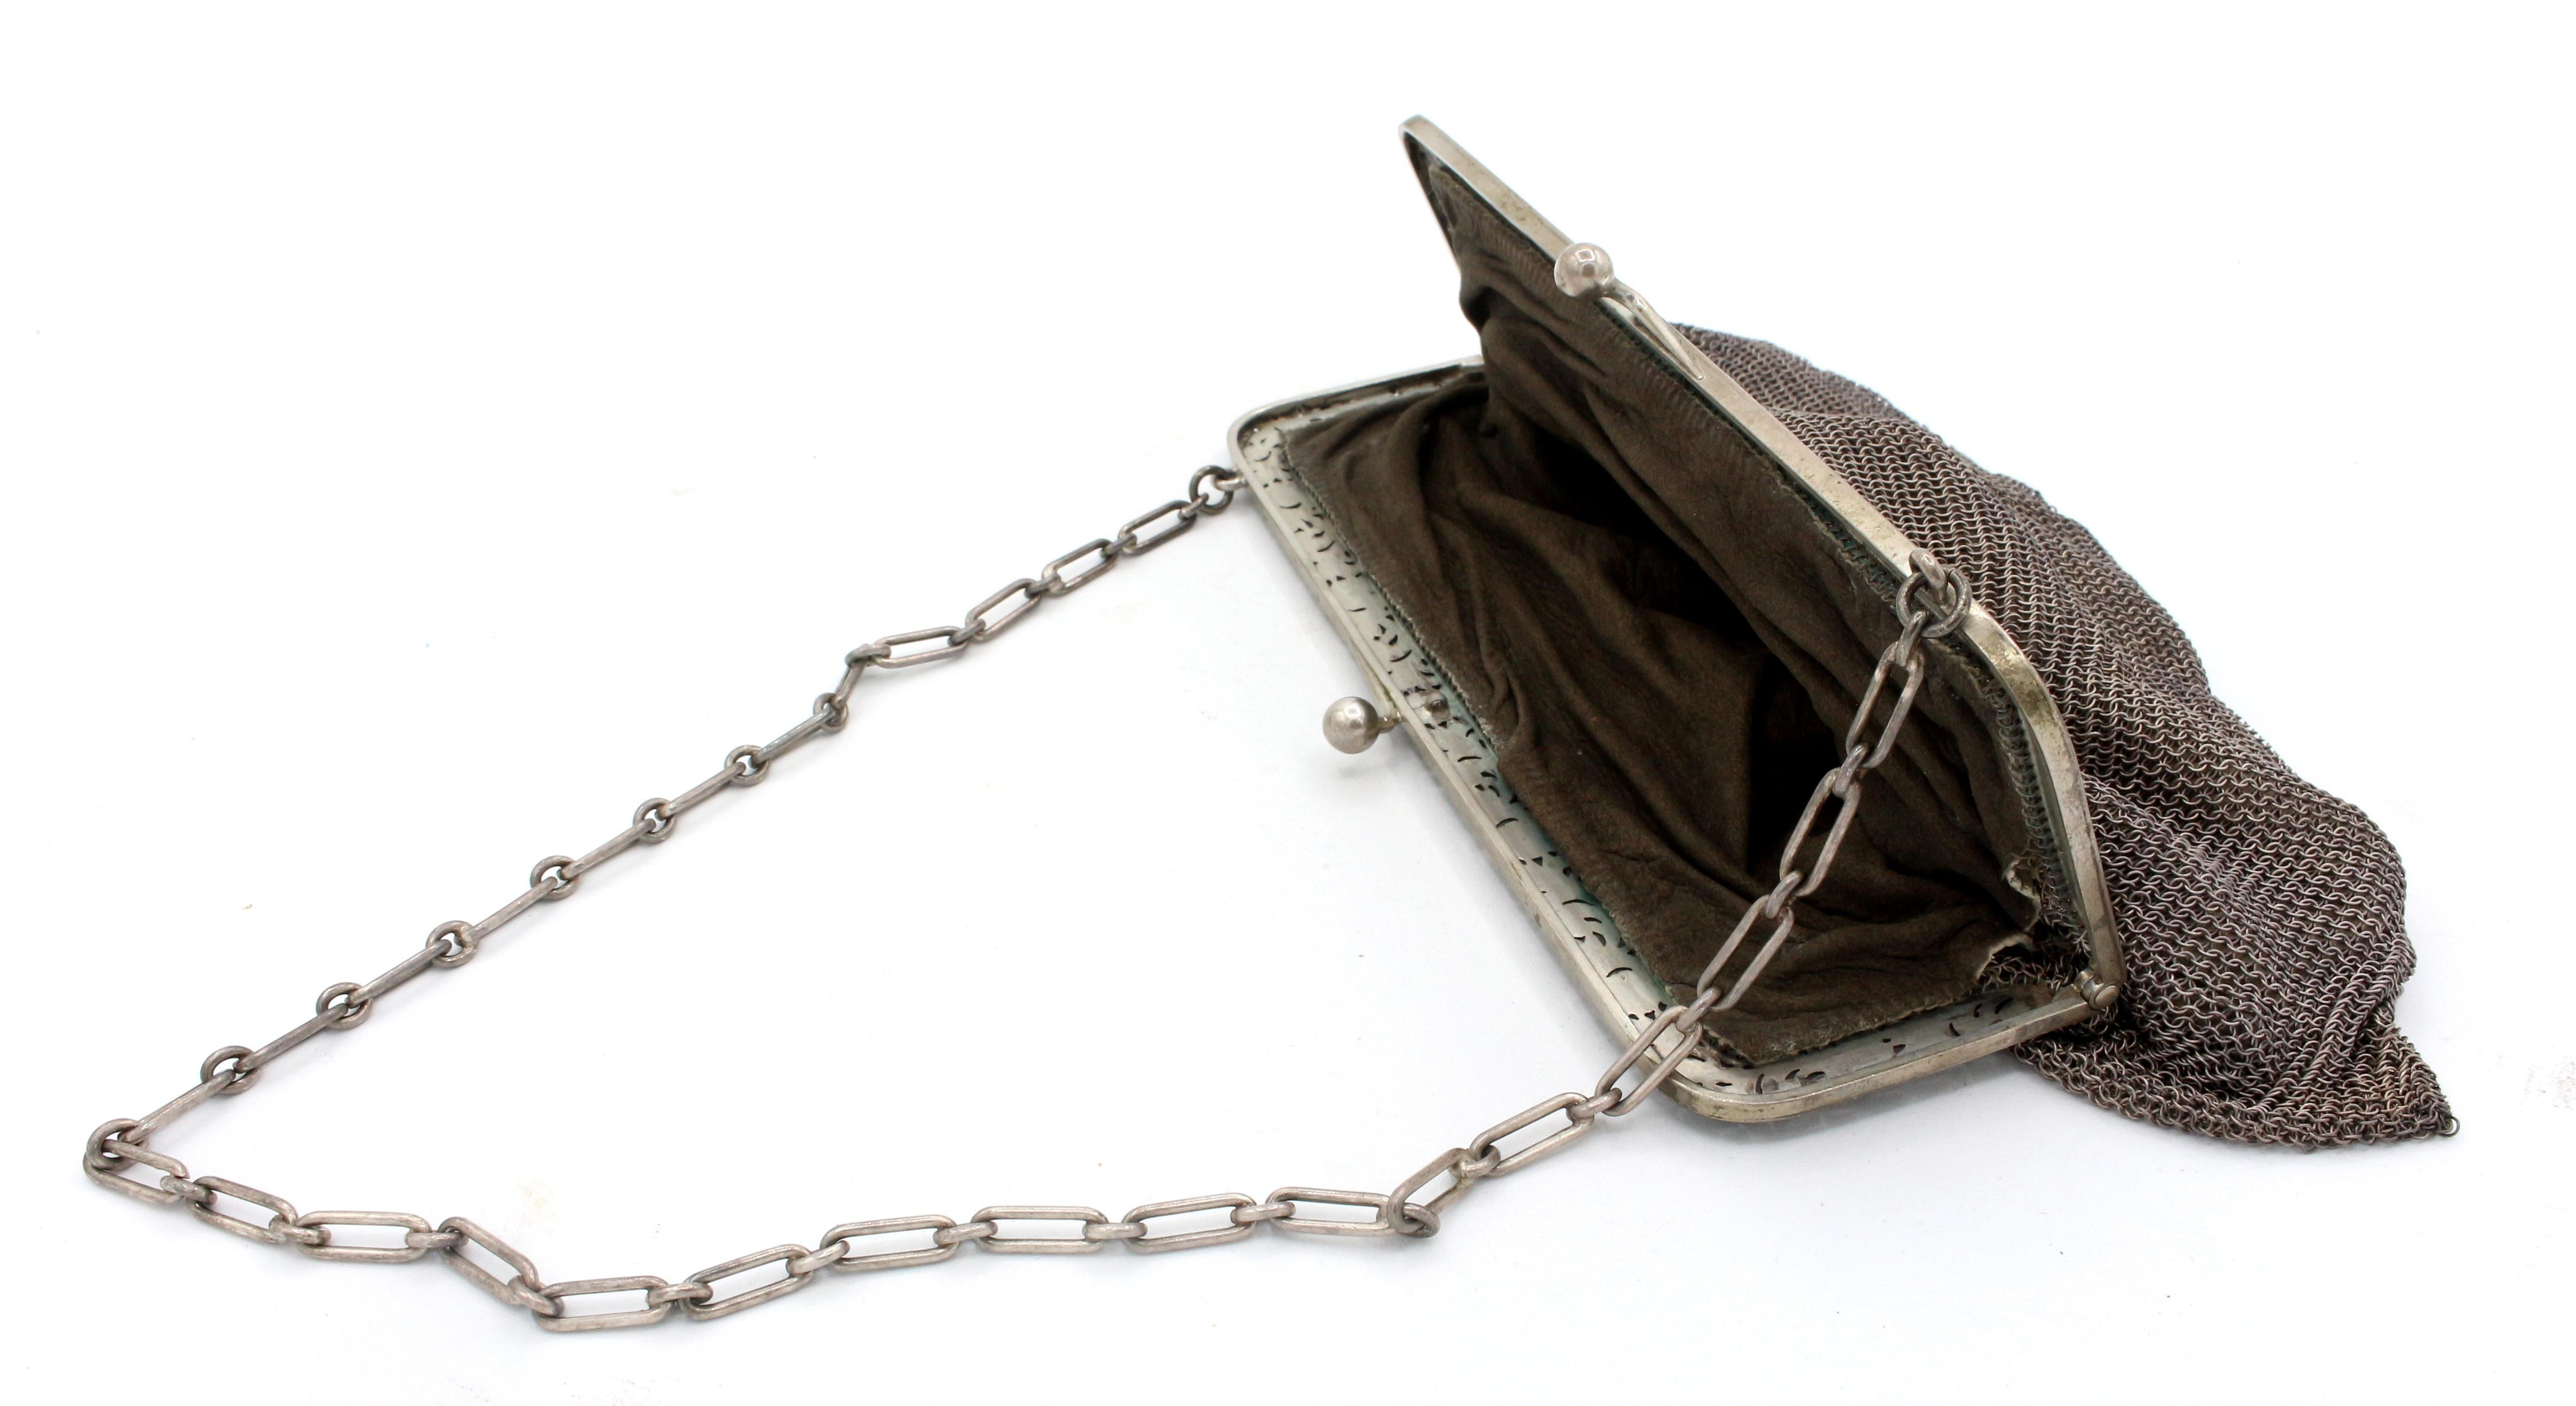 Continental 800 standard silver purse, late 19th-early 20th century. Reticulated entwined leaves & flowers supporting the woven silver mech bag with suede liner. Contains and as found coin purse of silver mesh. 9.40 troy oz. excluding the coin